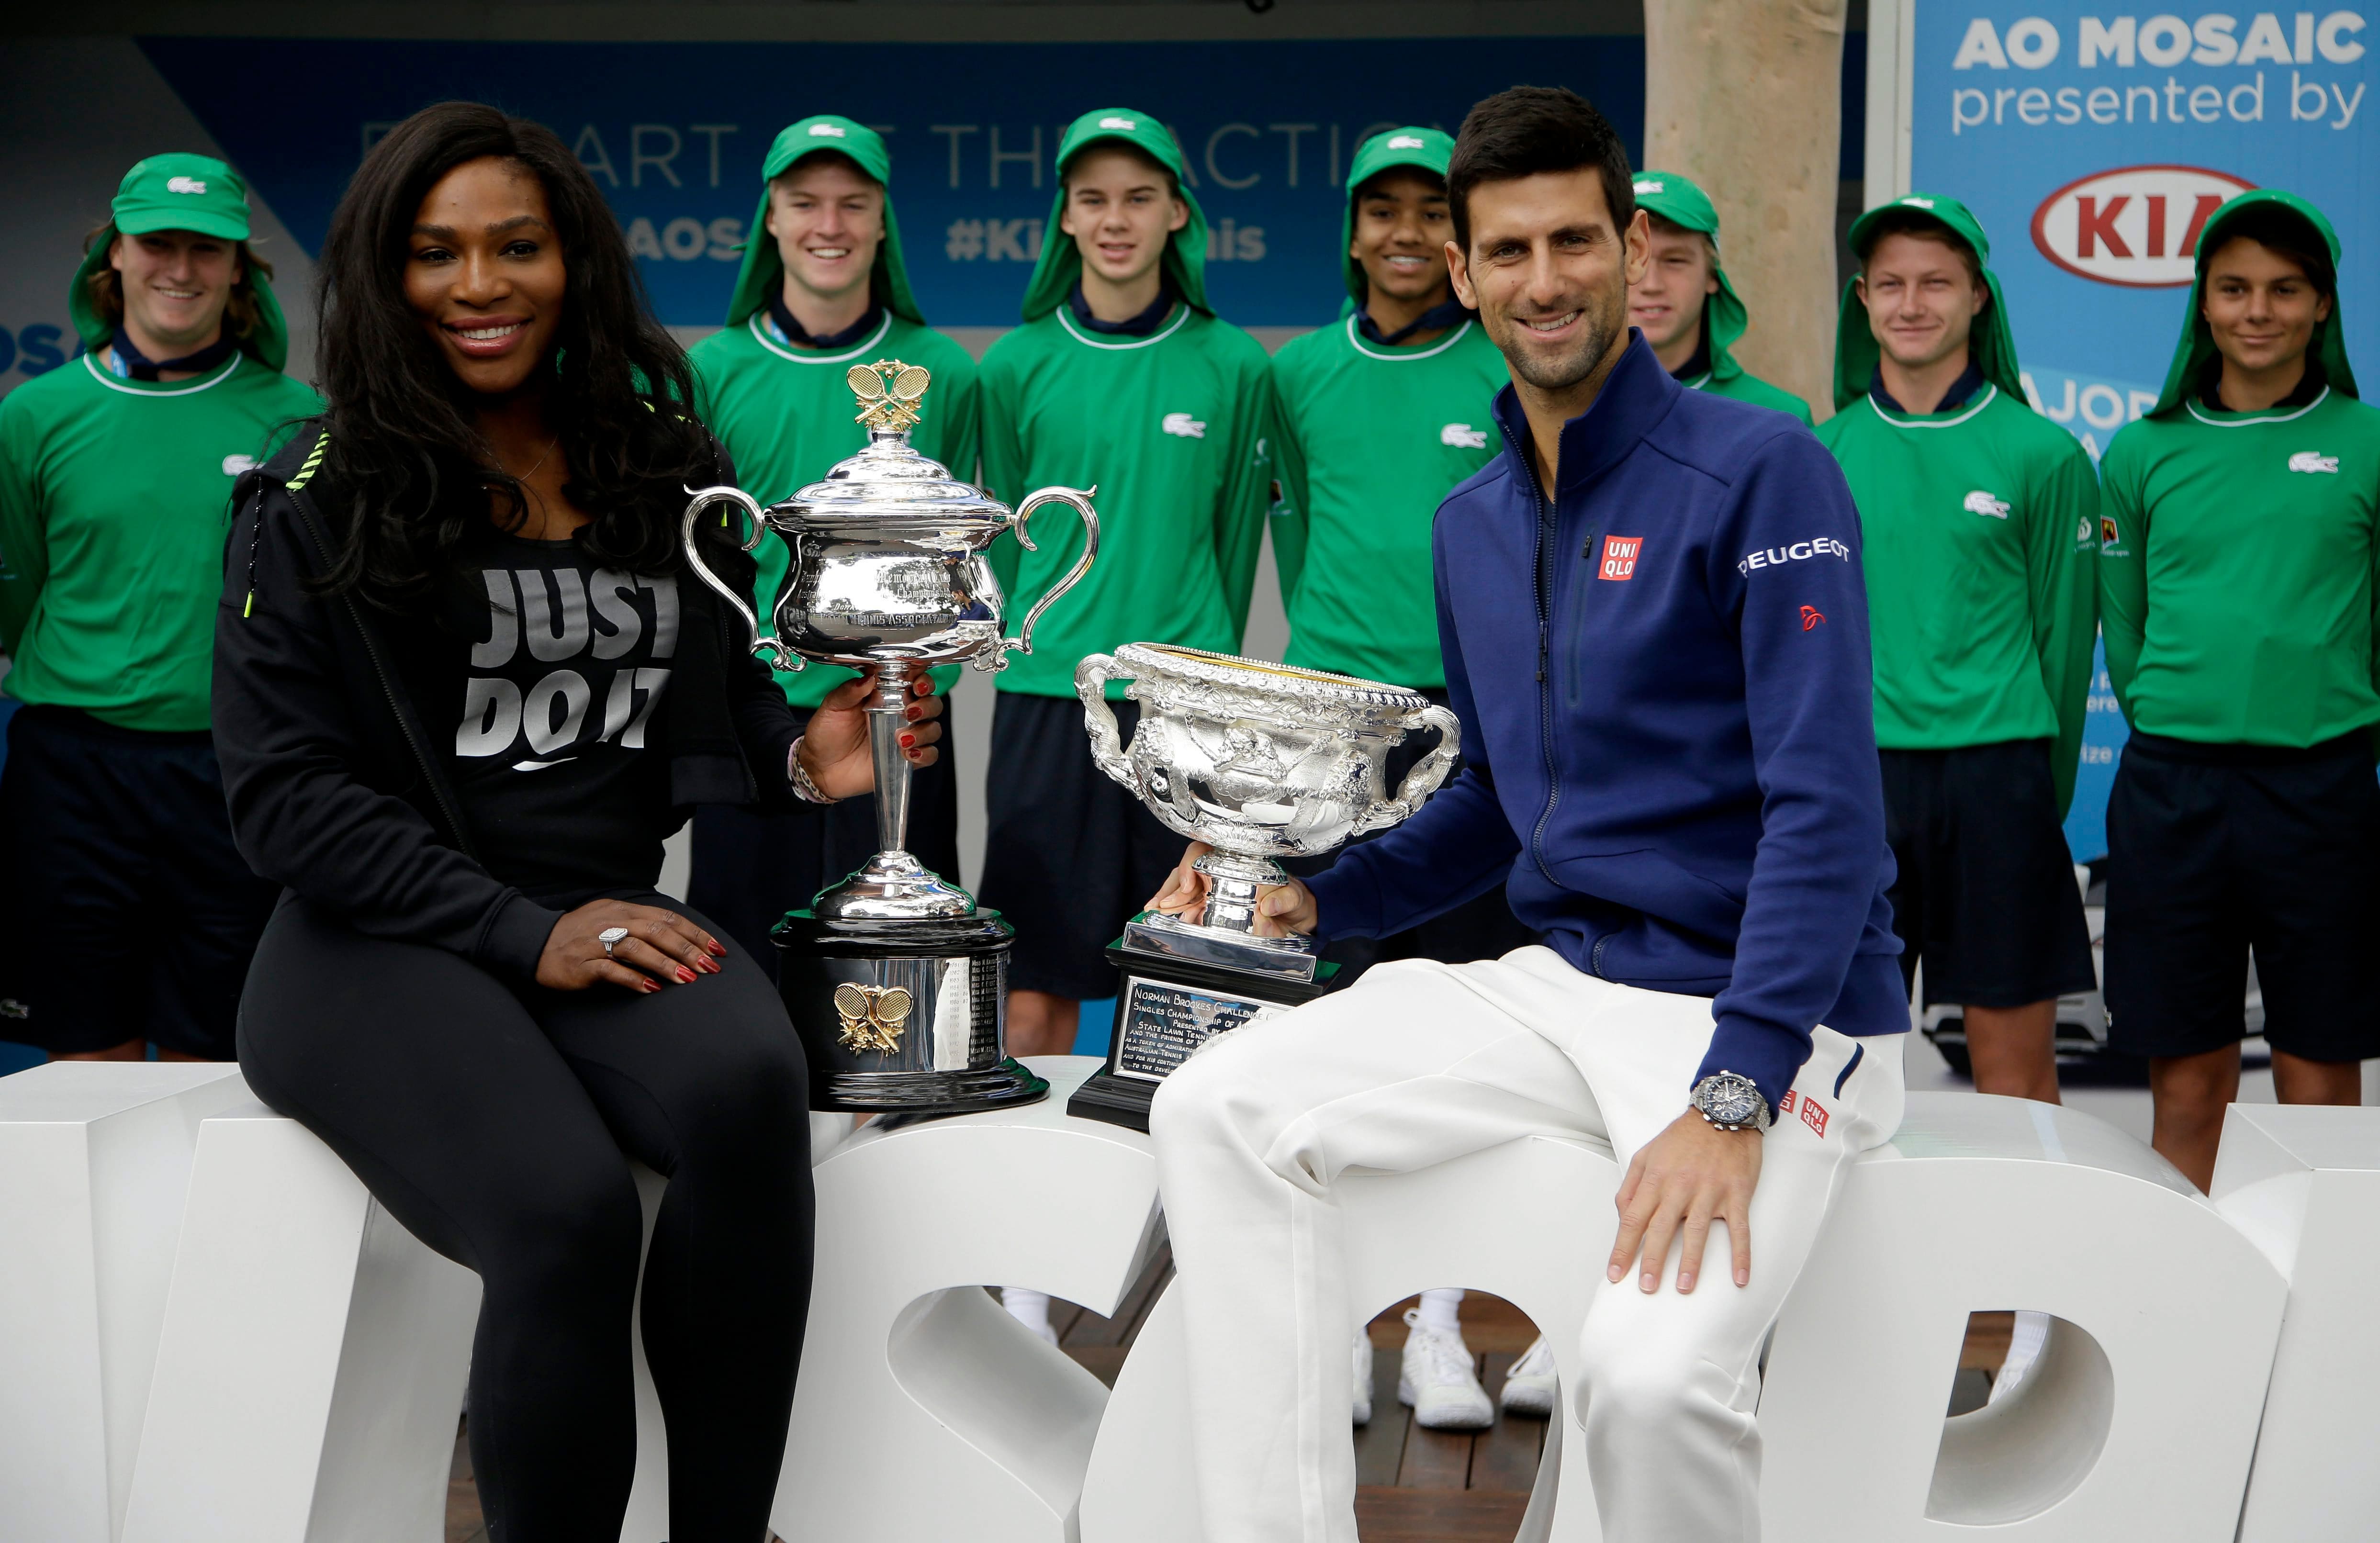 Defending champions Serena Williams of the US and Serbias Novak Djokovic pose for a photo with their trophies as they arrive for the official draw at the Australian Open tennis championships.